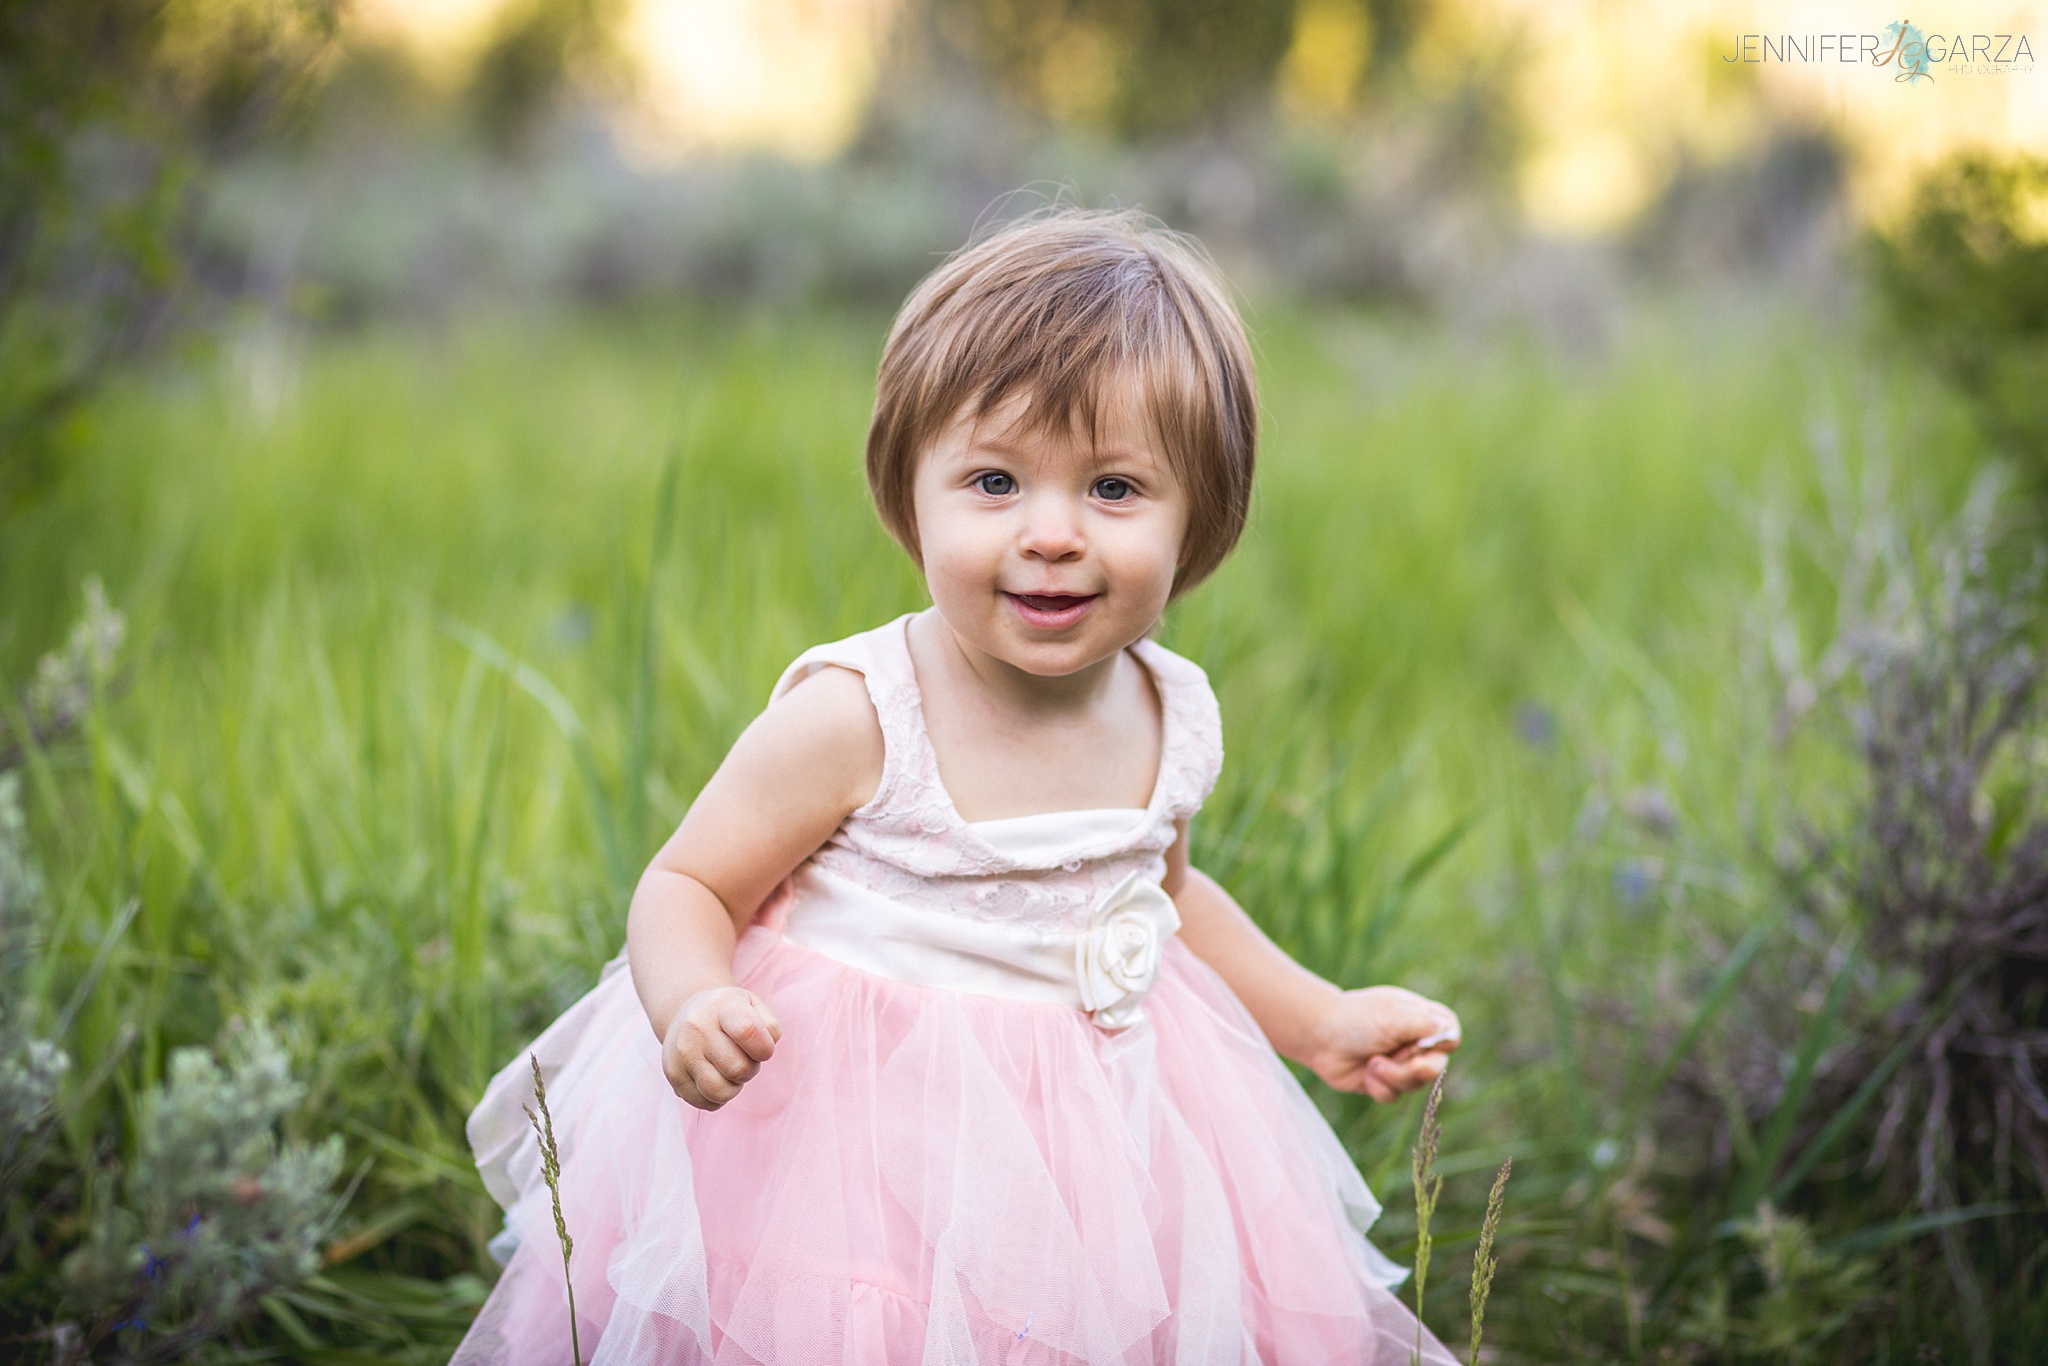 Savannah has grown so much over the past year. Sylvan Lake Family Photo Session.